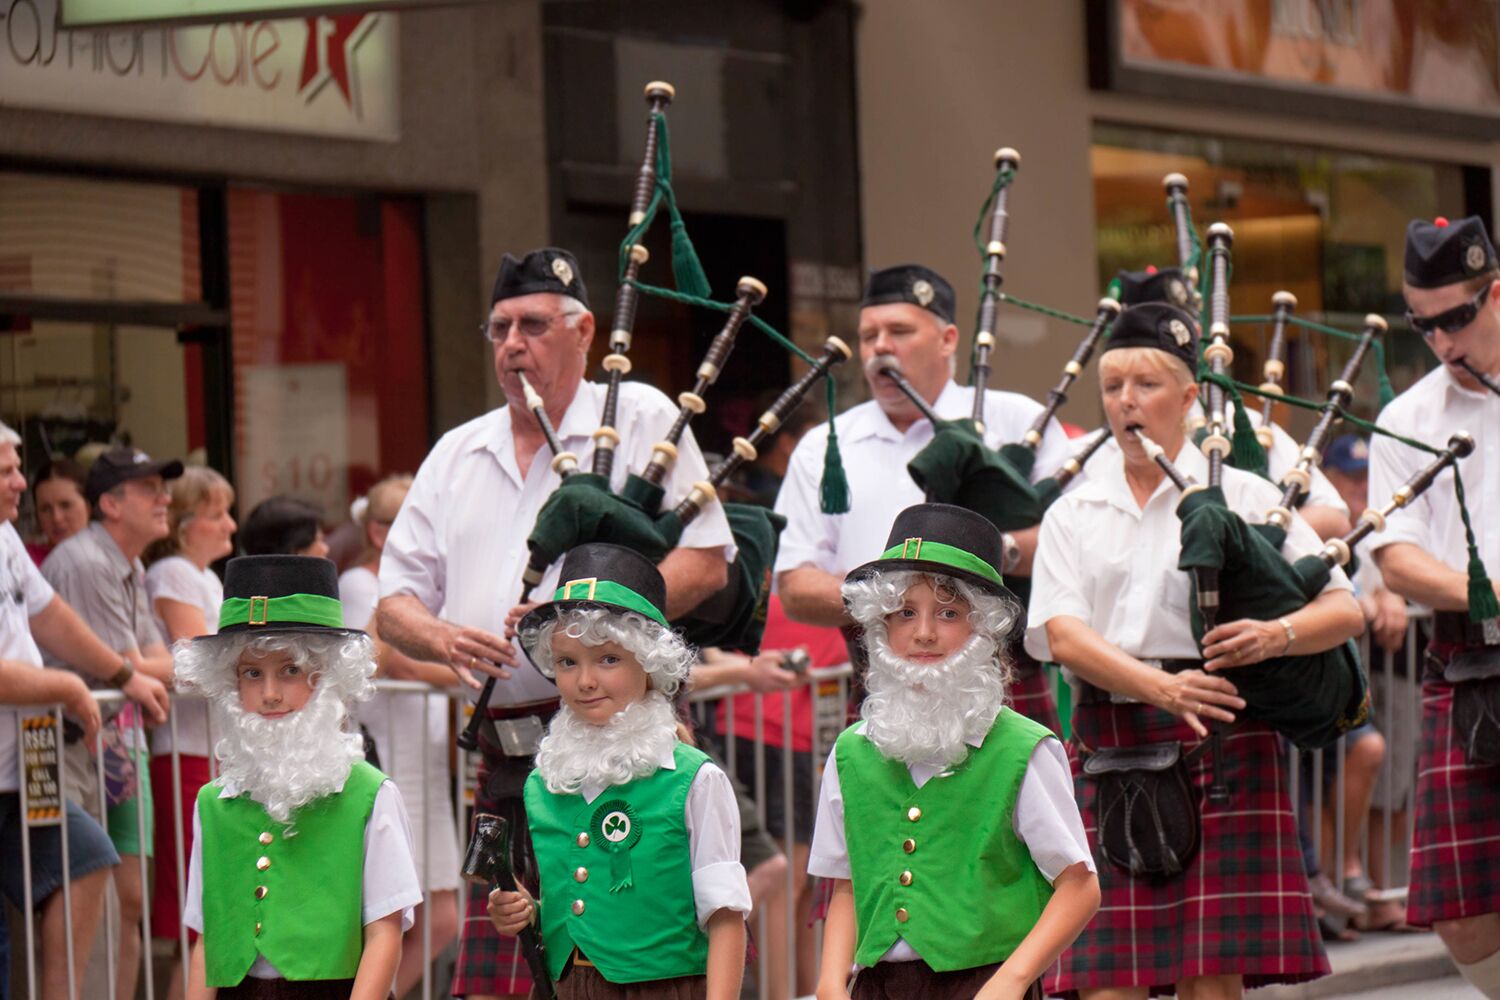 Find a Bagpiper for a St. Patrick's Day Party